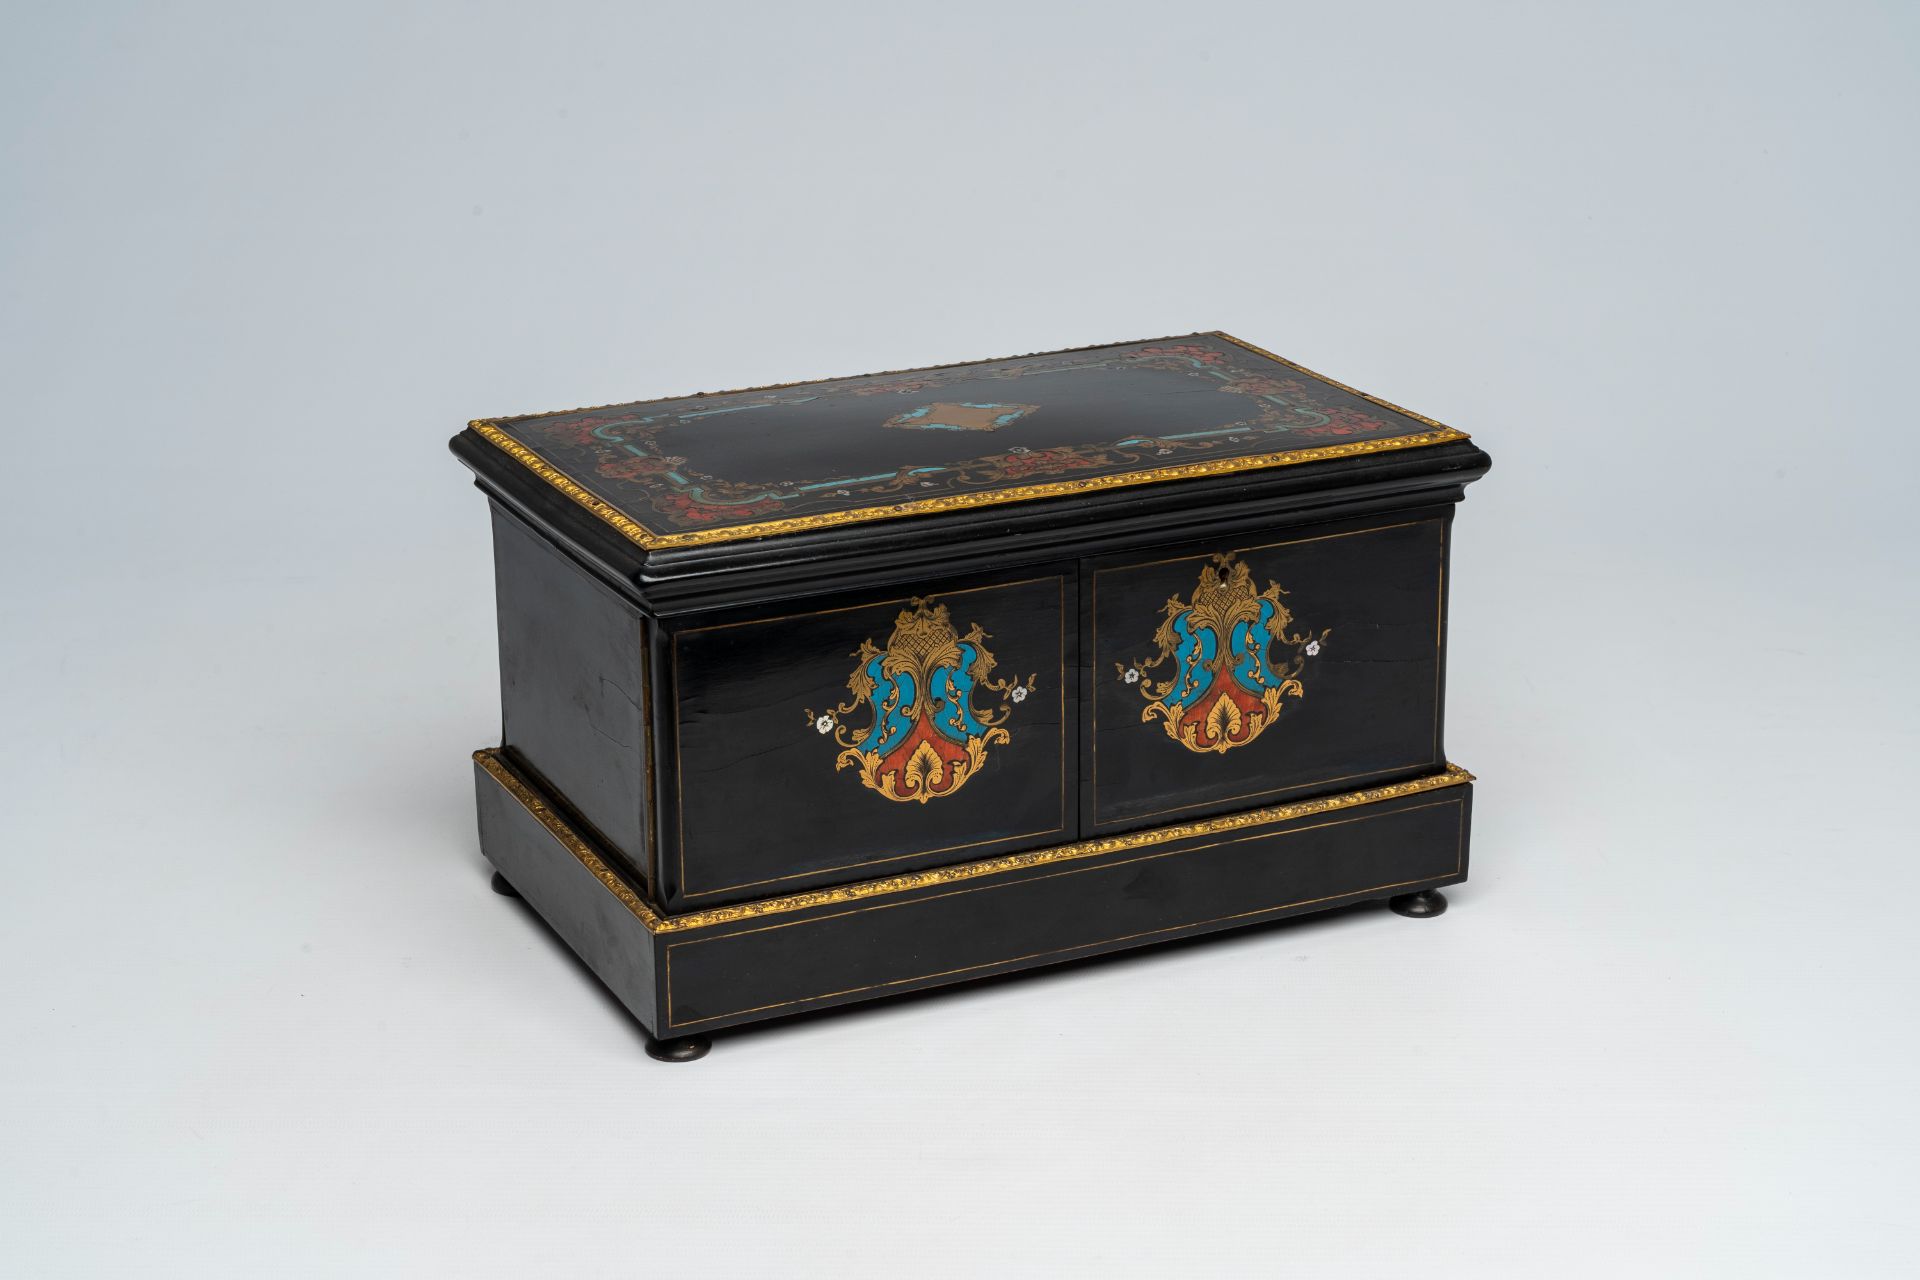 A French Historicism bronze mounted ebonised wooden tortoiseshell, mother-of pearl and brass marquet